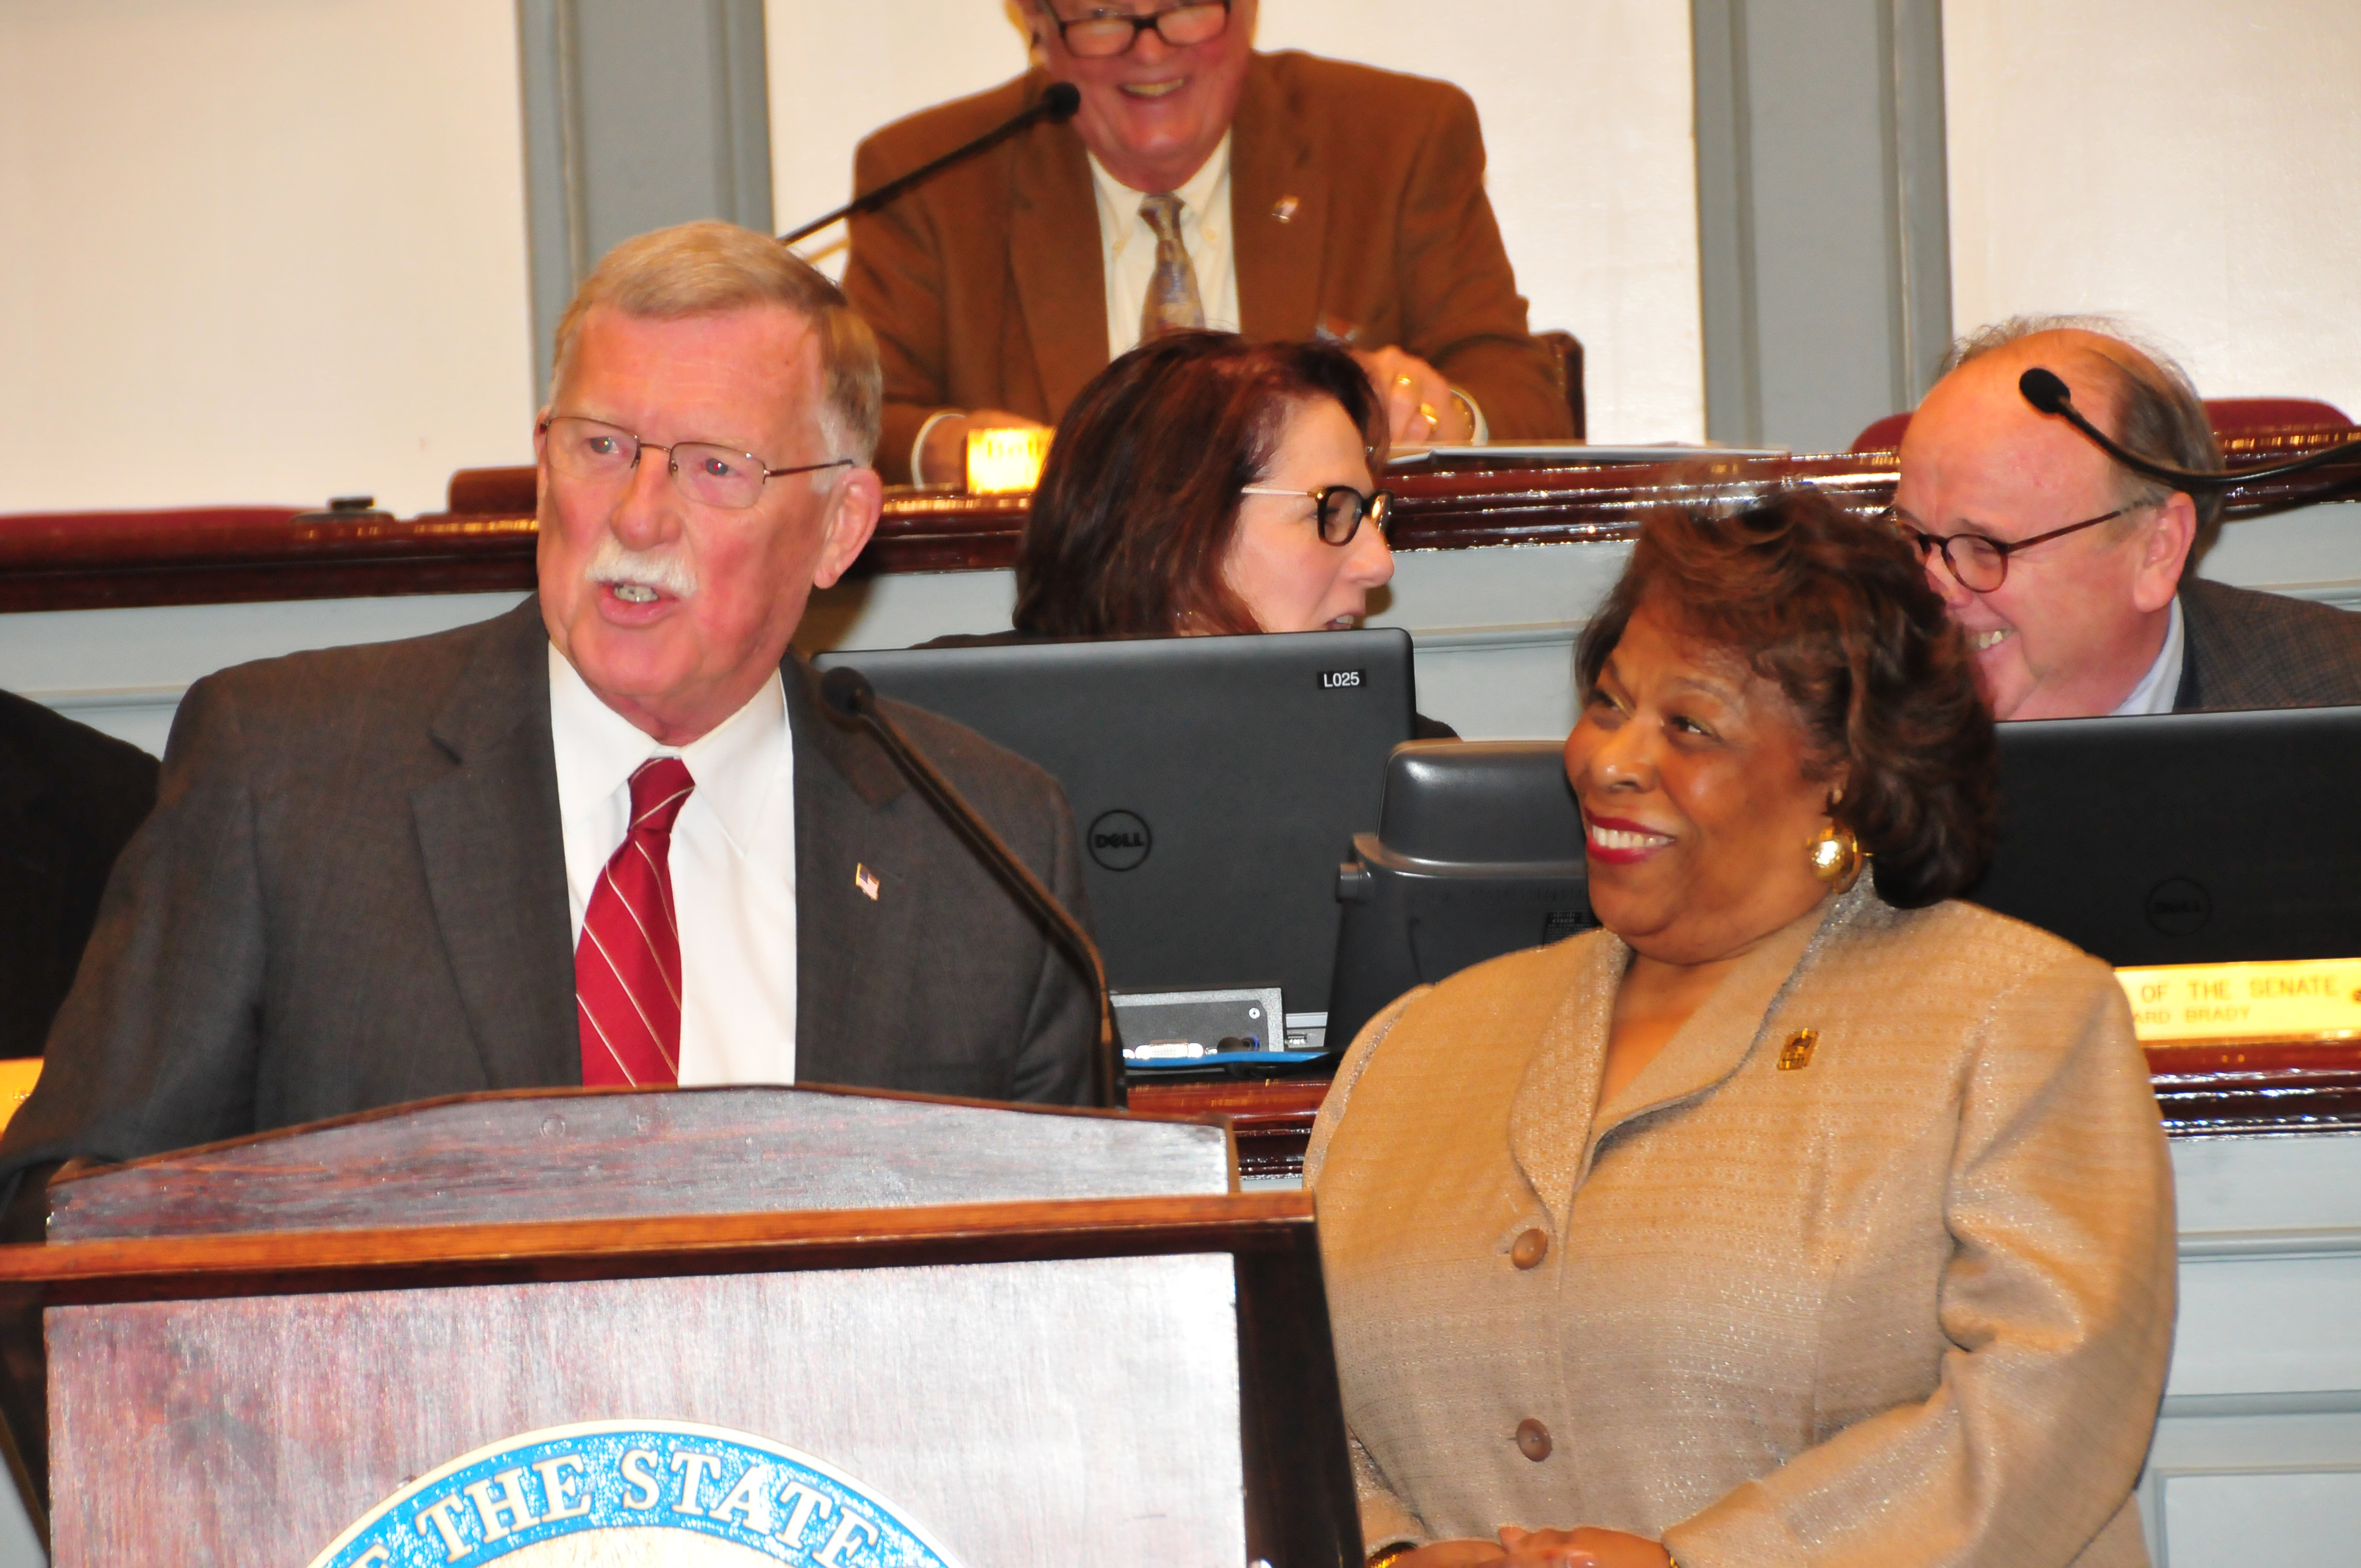 State Sen. Brian Bushweller presents a formal tribute in honor of interim DSU President Wilma Mishoe during the Jan. 25 session of the Delaware Senate.